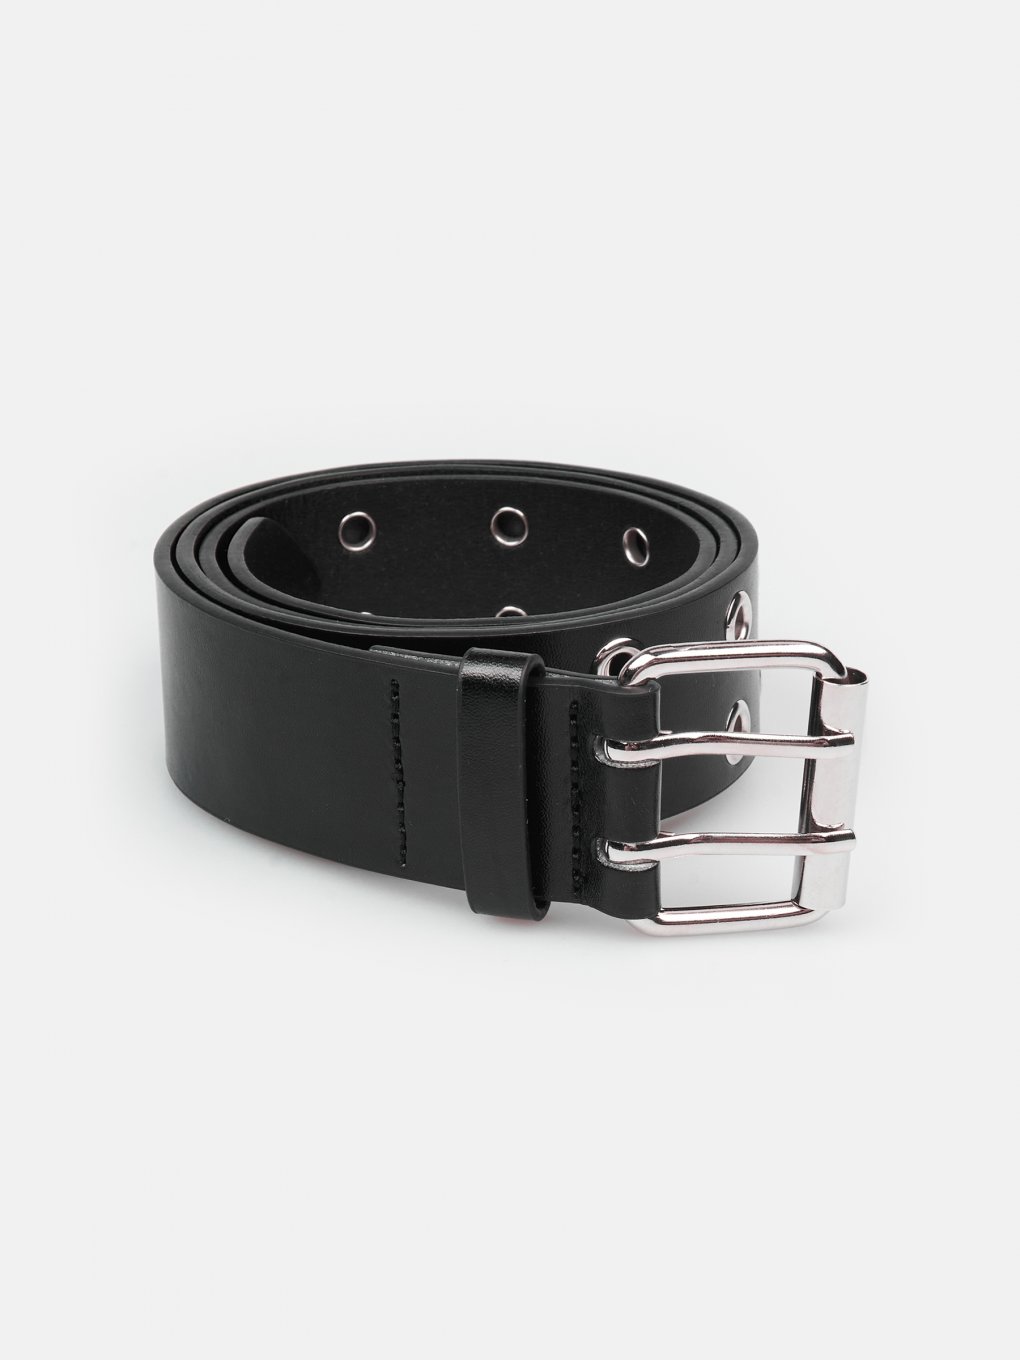 Wide faux leather belt with metal pins